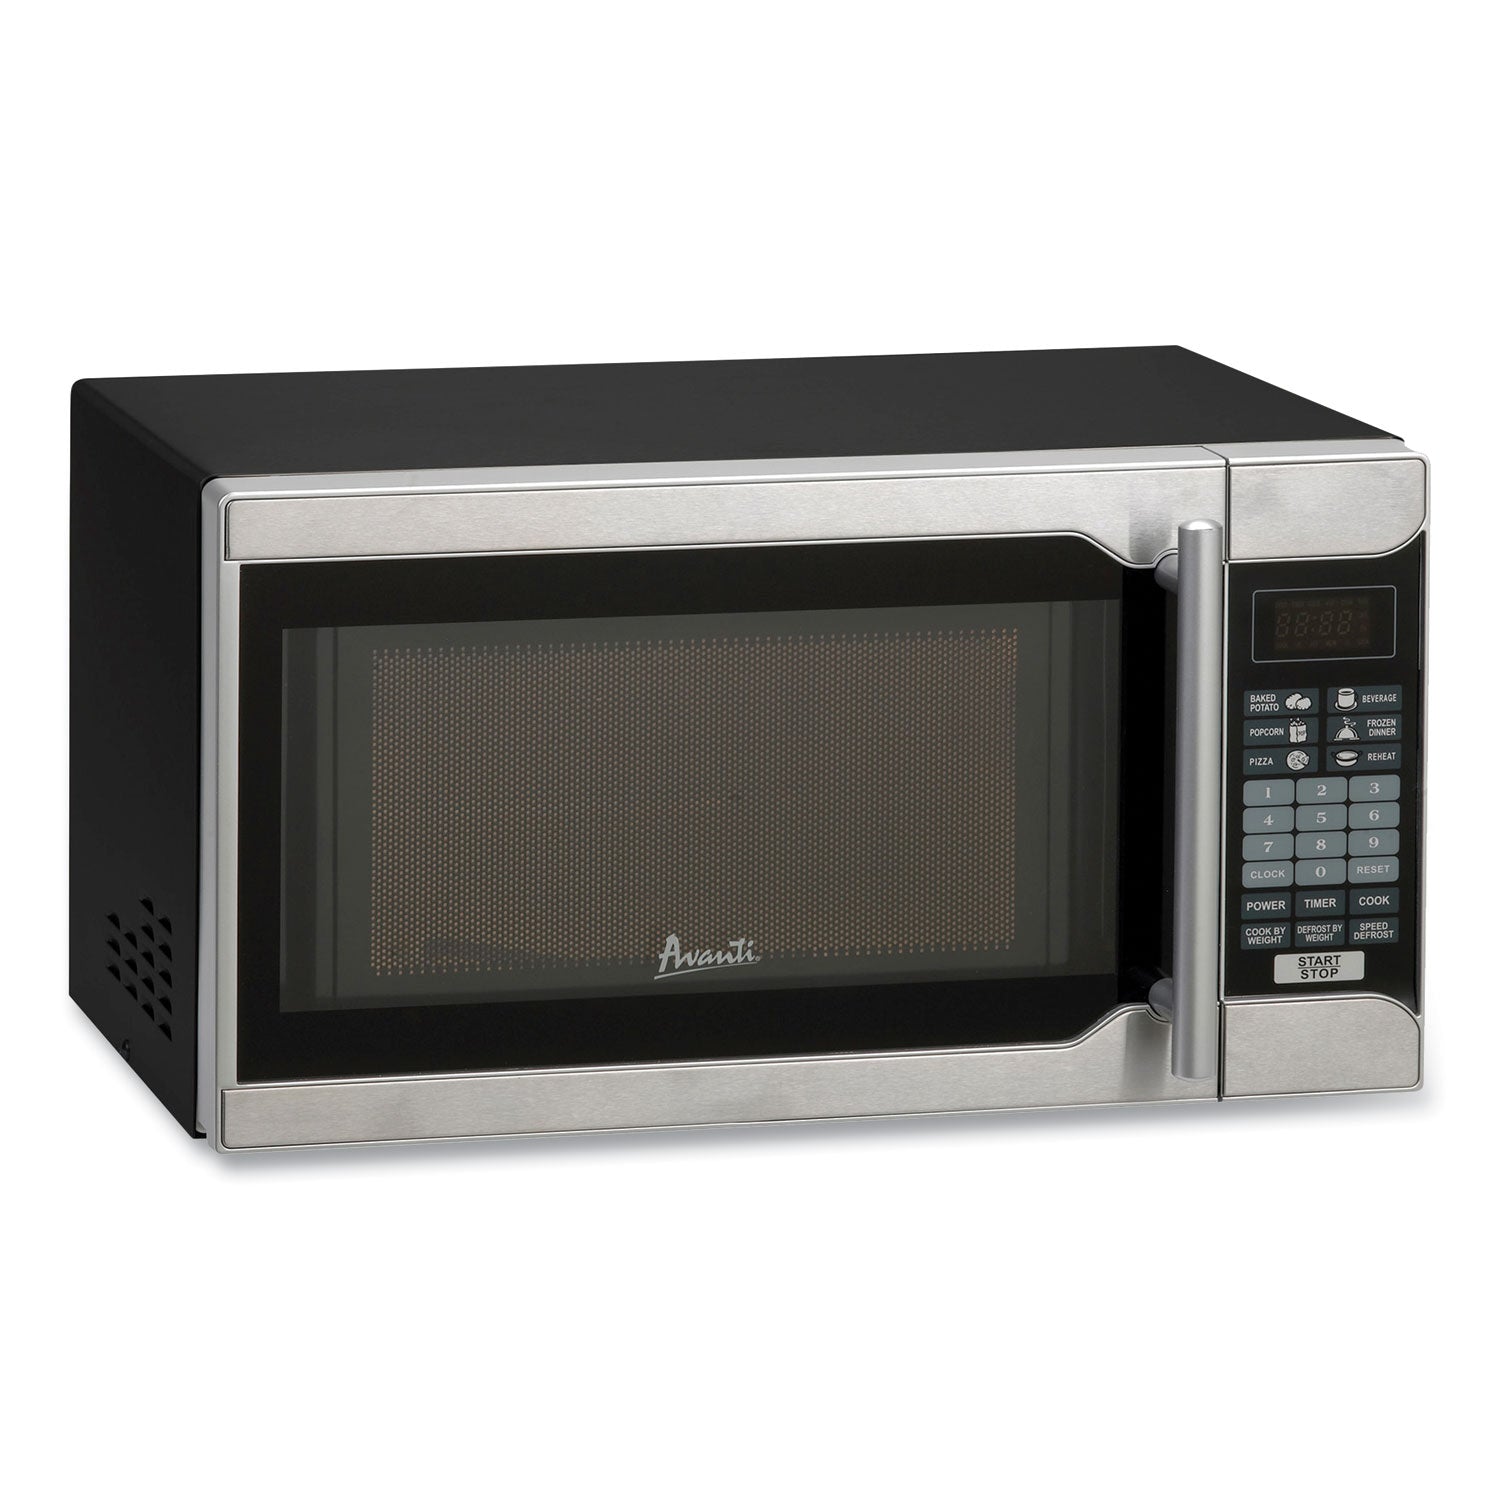 0.7 Cu.ft Capacity Microwave Oven, 700 Watts, Stainless Steel and Black, Sold as 1 Each - 1